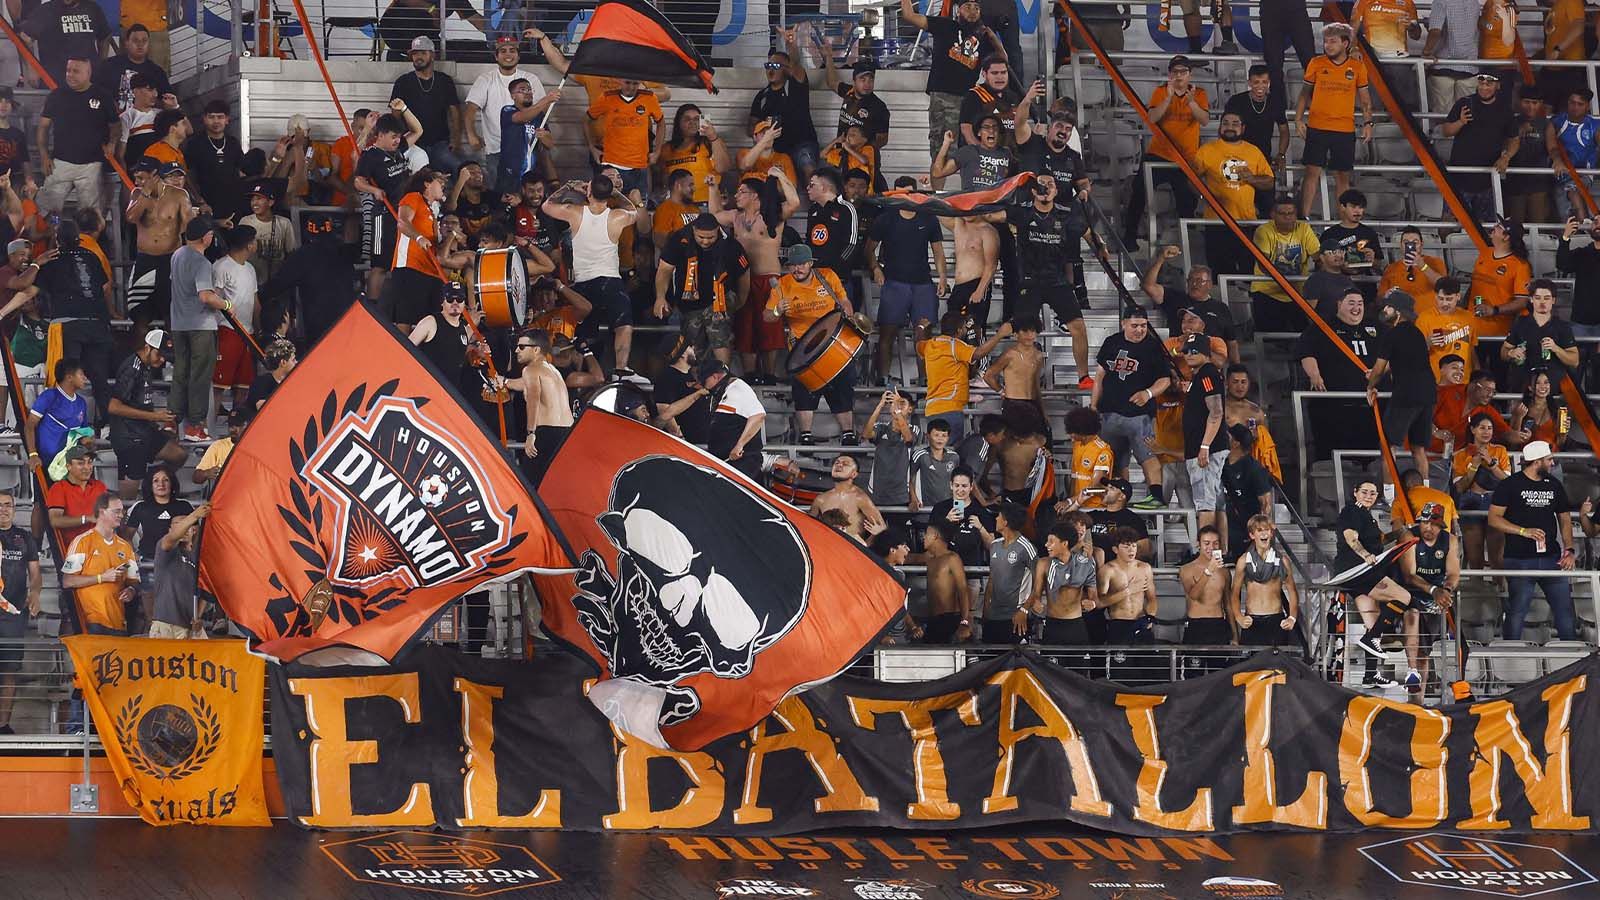 Houston Dynamo FC to begin Leagues Cup play on July 21 and host